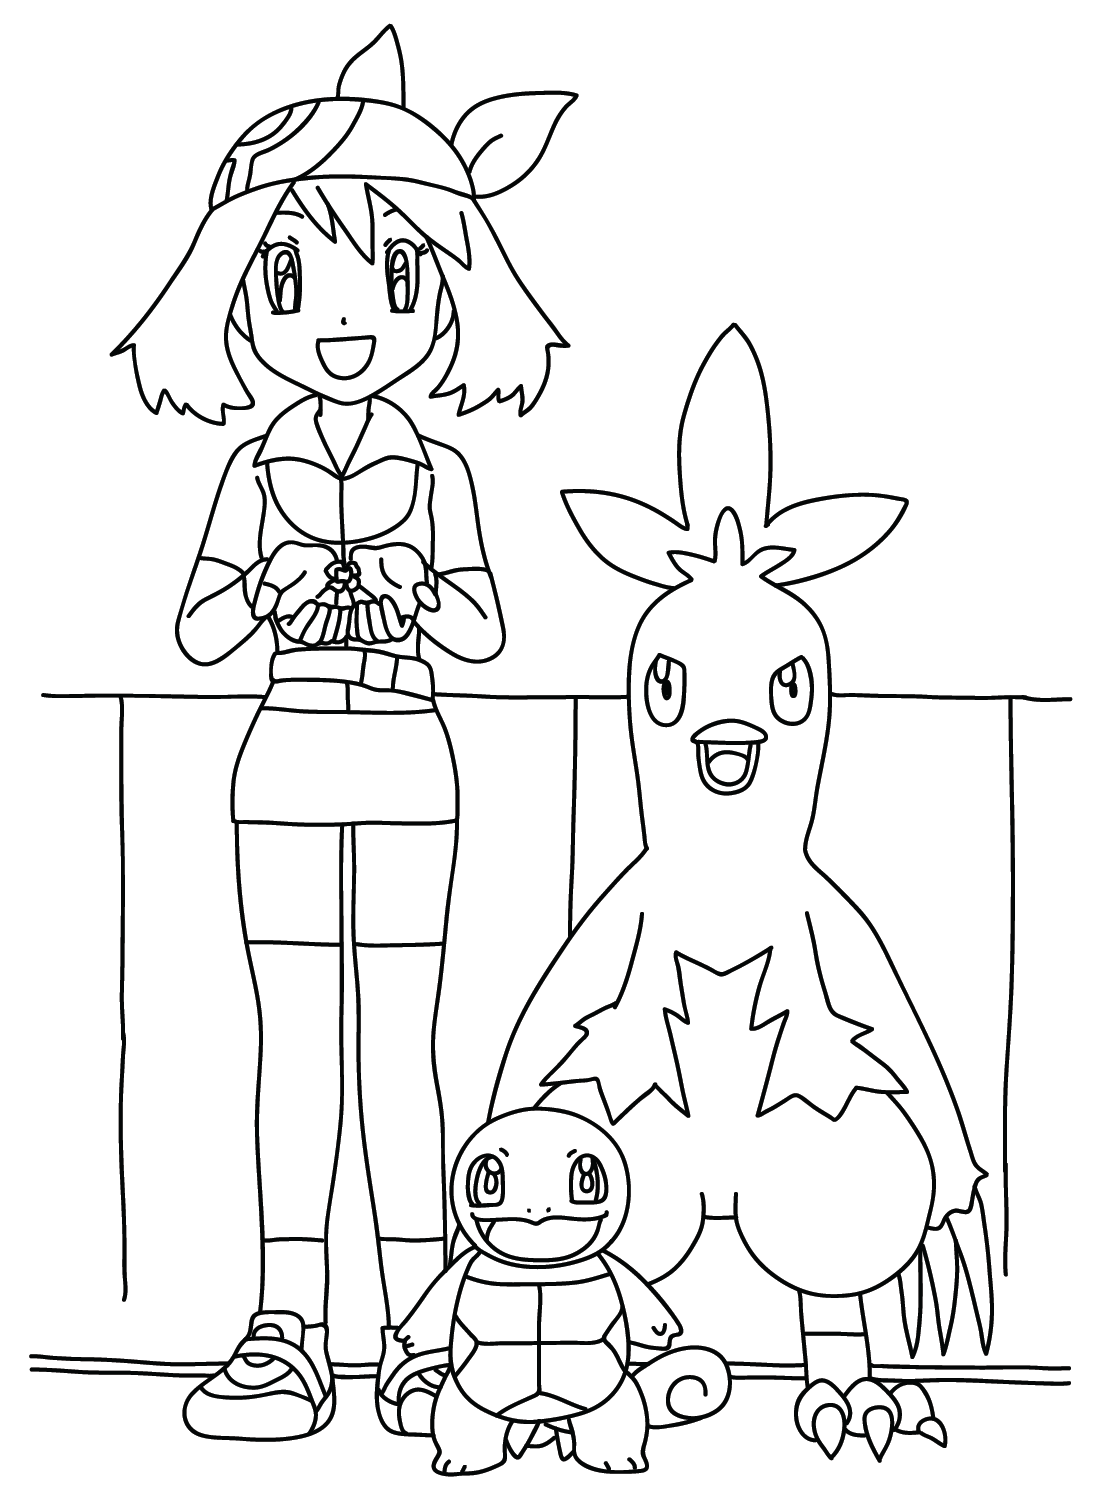 May and Pokemon Coloring Page from May Pokemon